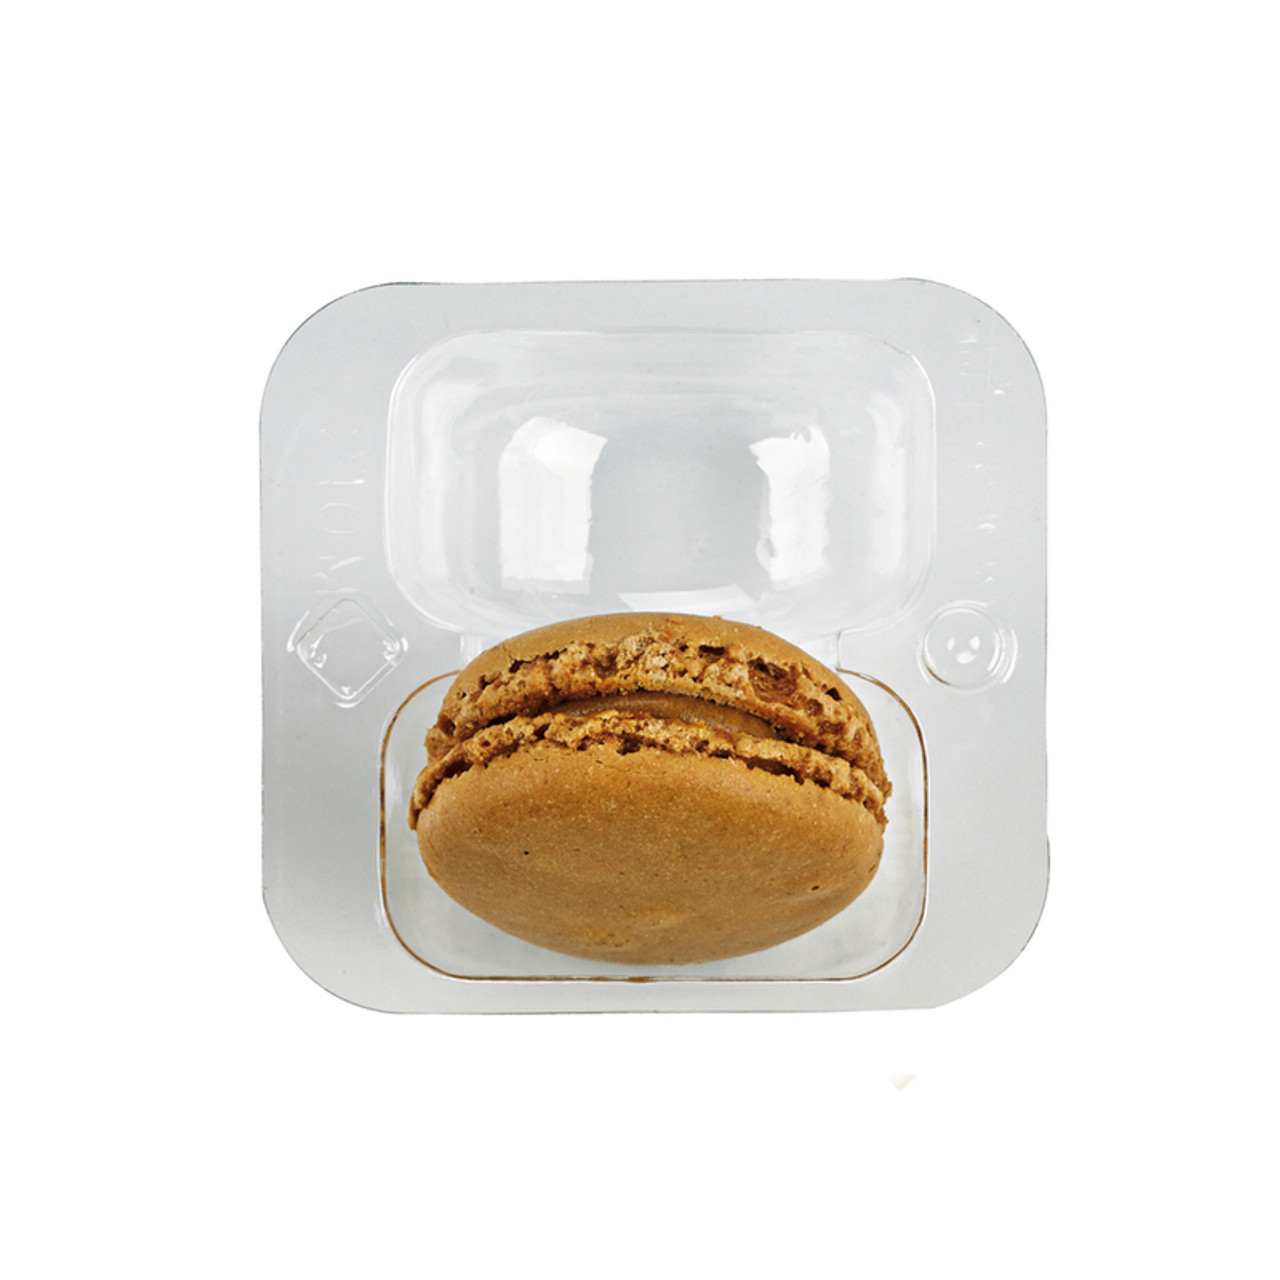 Insert for 2 Macarons (1x2) with Clip Closure 2.5 x 2.6 x 1in - 50 